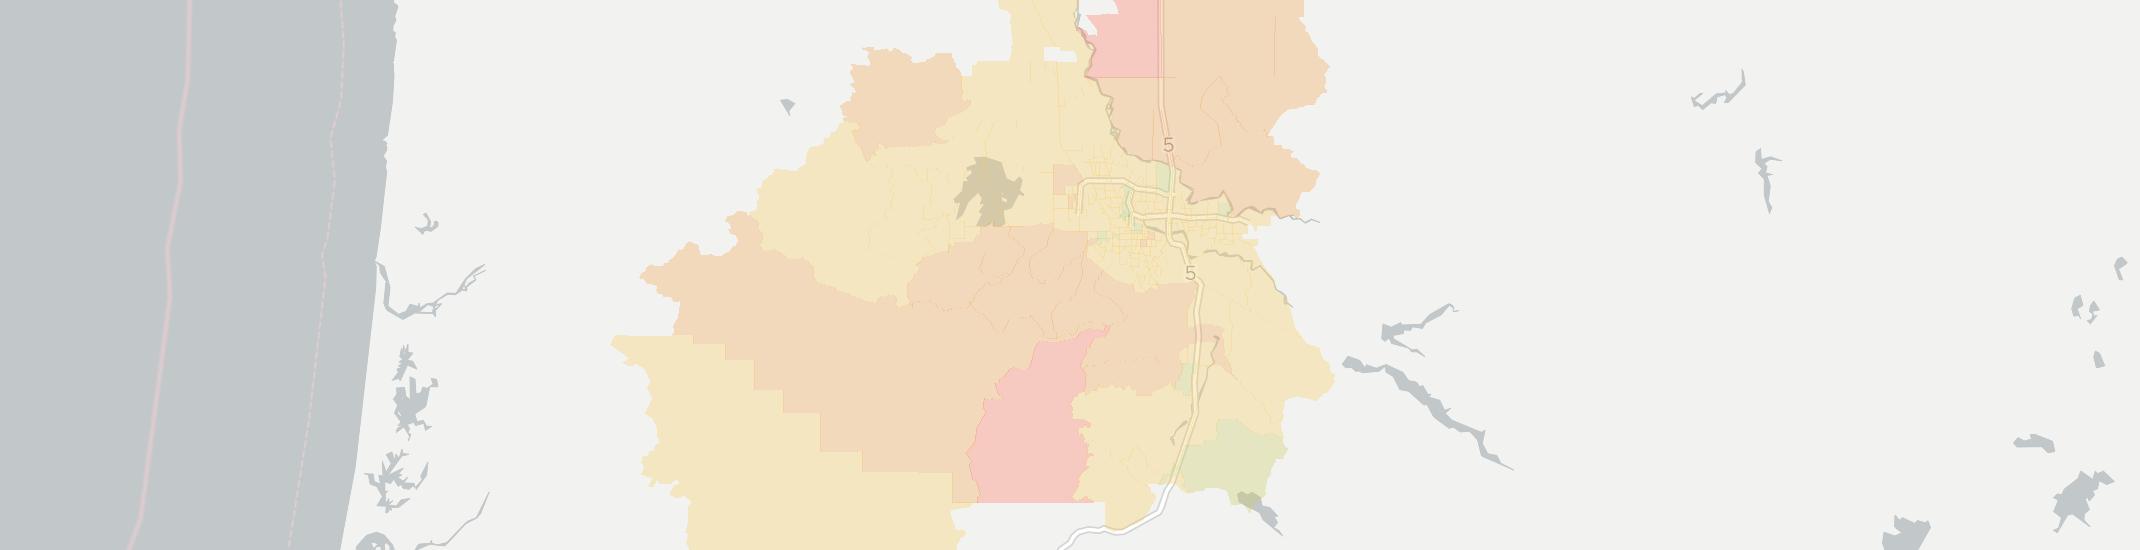 Eugene Internet Competition Map. Click for interactive map